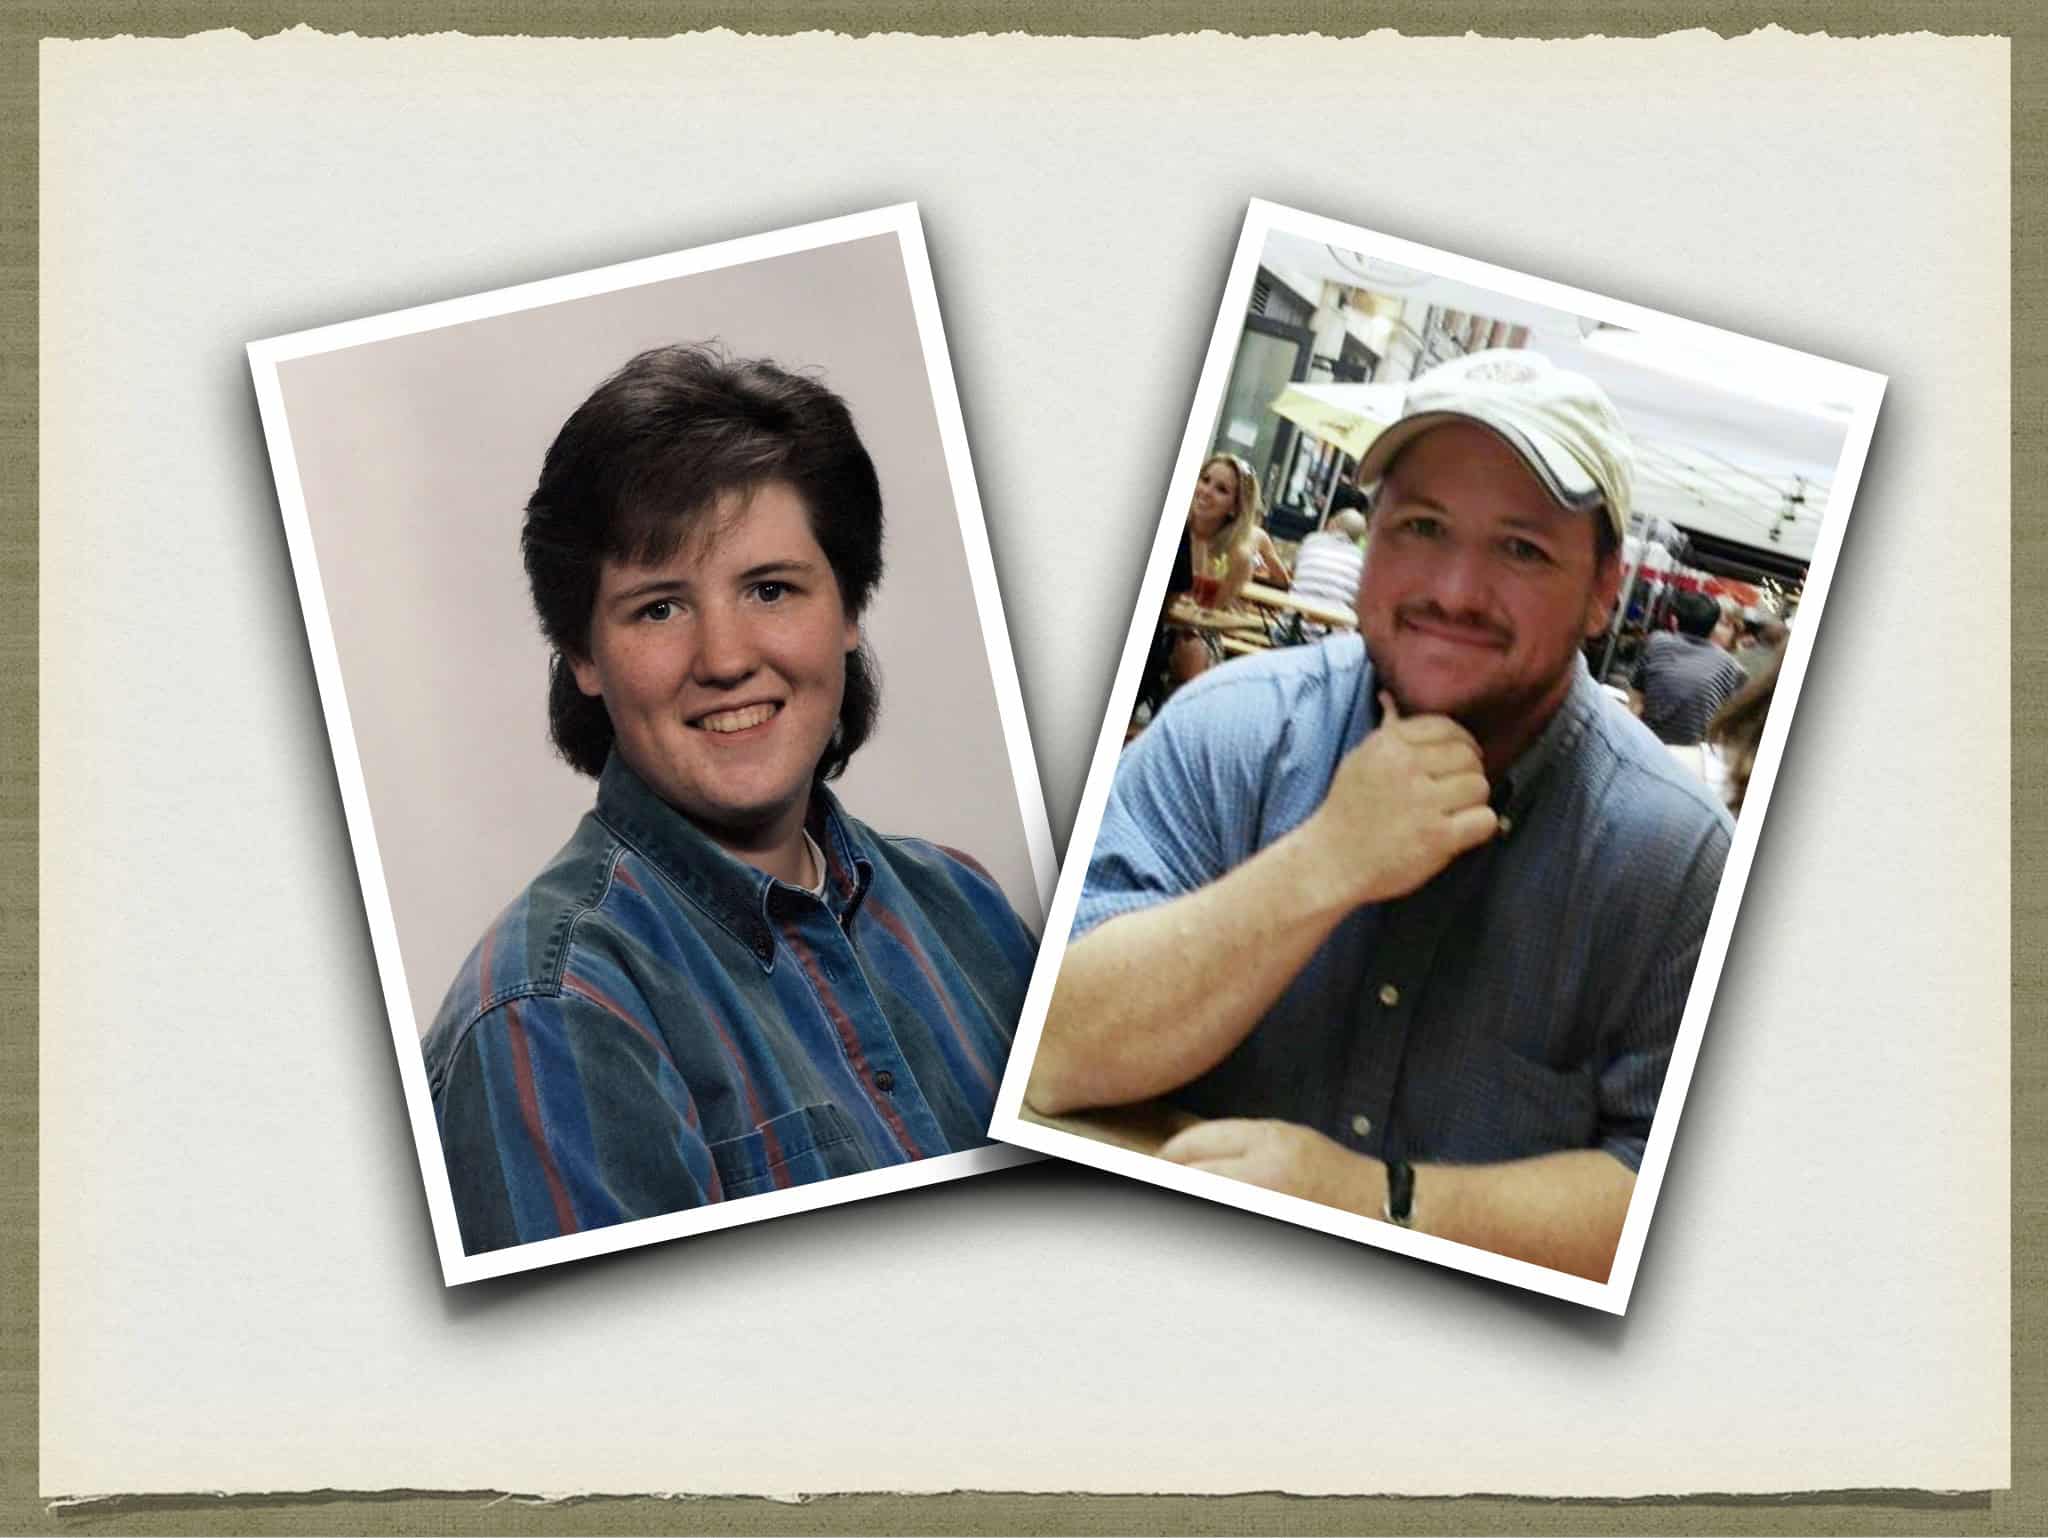 Brenda Walsh (L) smiles at the camera with a dark rown mullet and a striped button down shirt. Brent Walsh (R) smiles at the camera with a white baseball cap, facial hair, and a blue button-down shirt. 